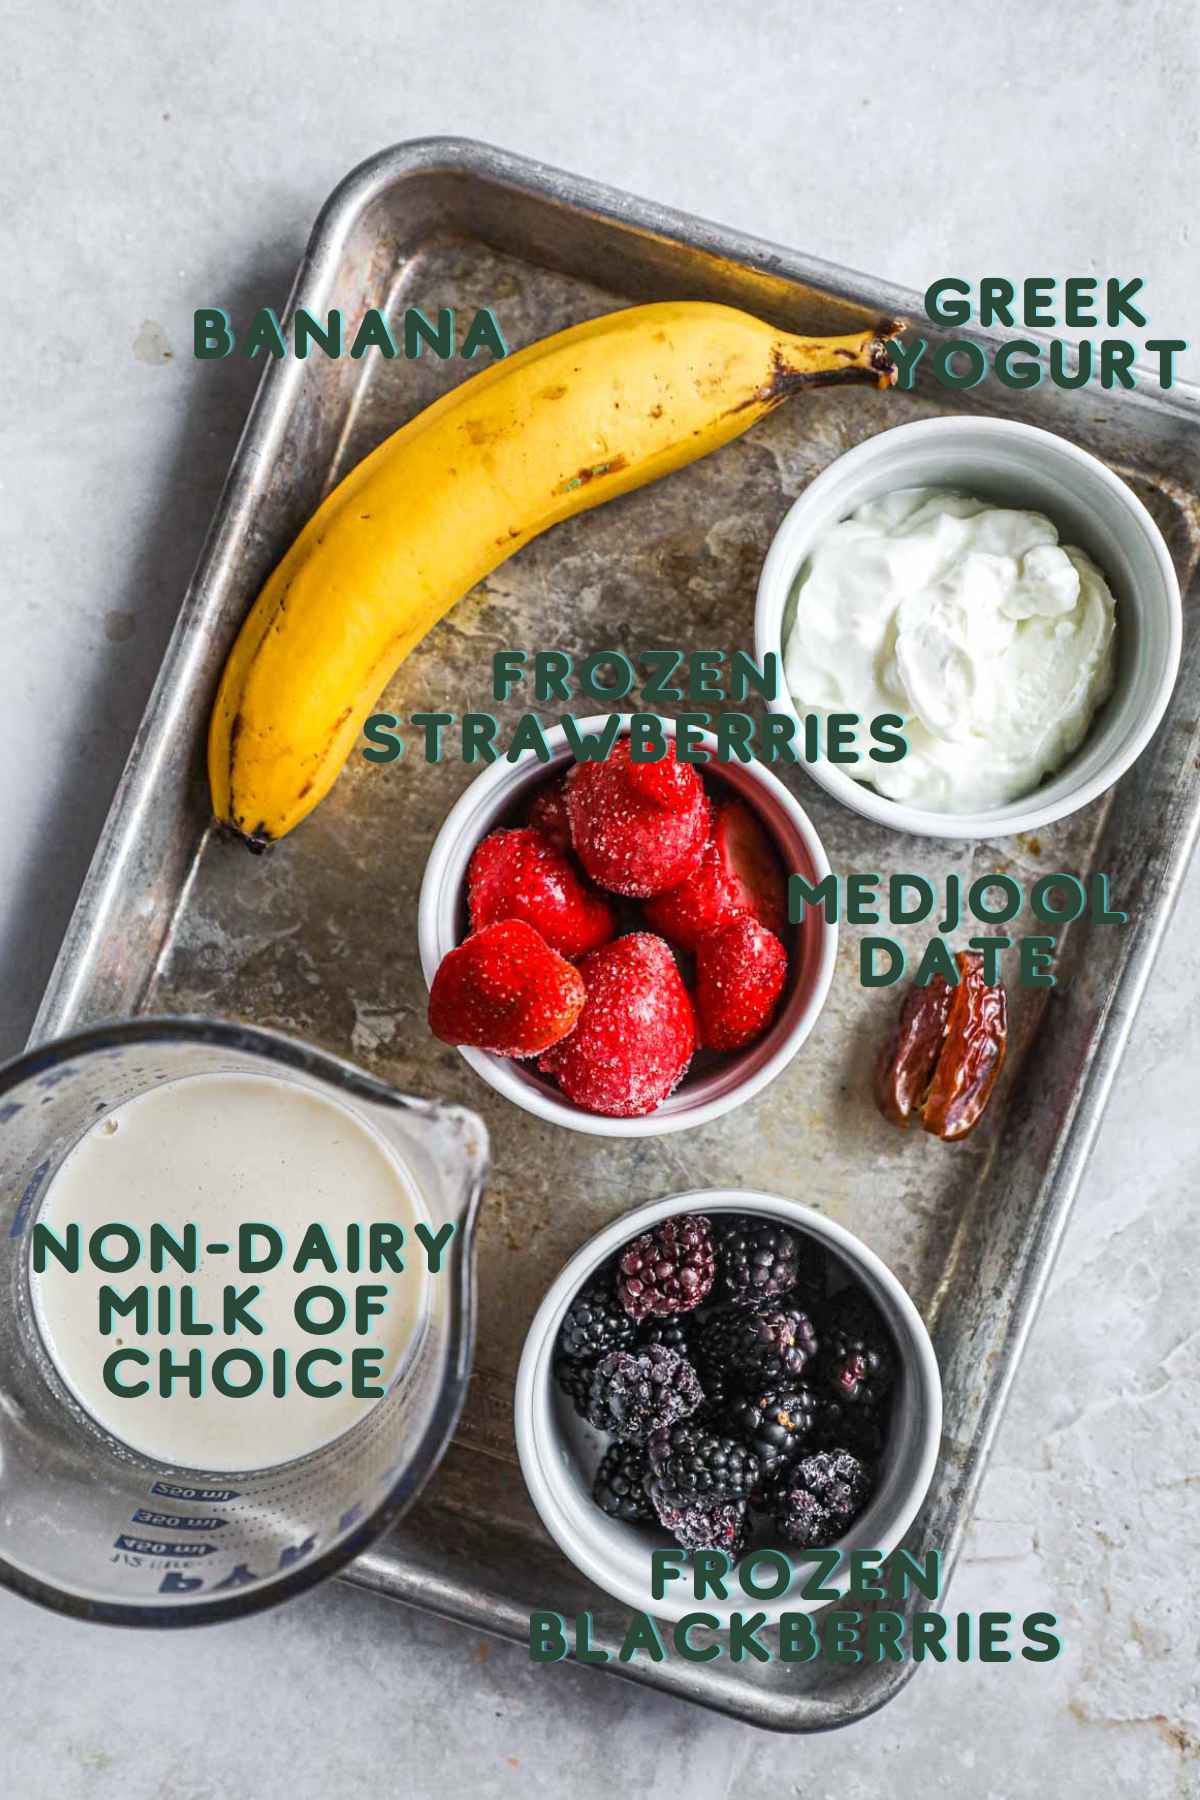 Ingredients to make blackberry strawberry and banana smoothie, including banana, frozen strawberries and blackberries, medjool date, Greek yogurt, and non-dairy milk of choice.